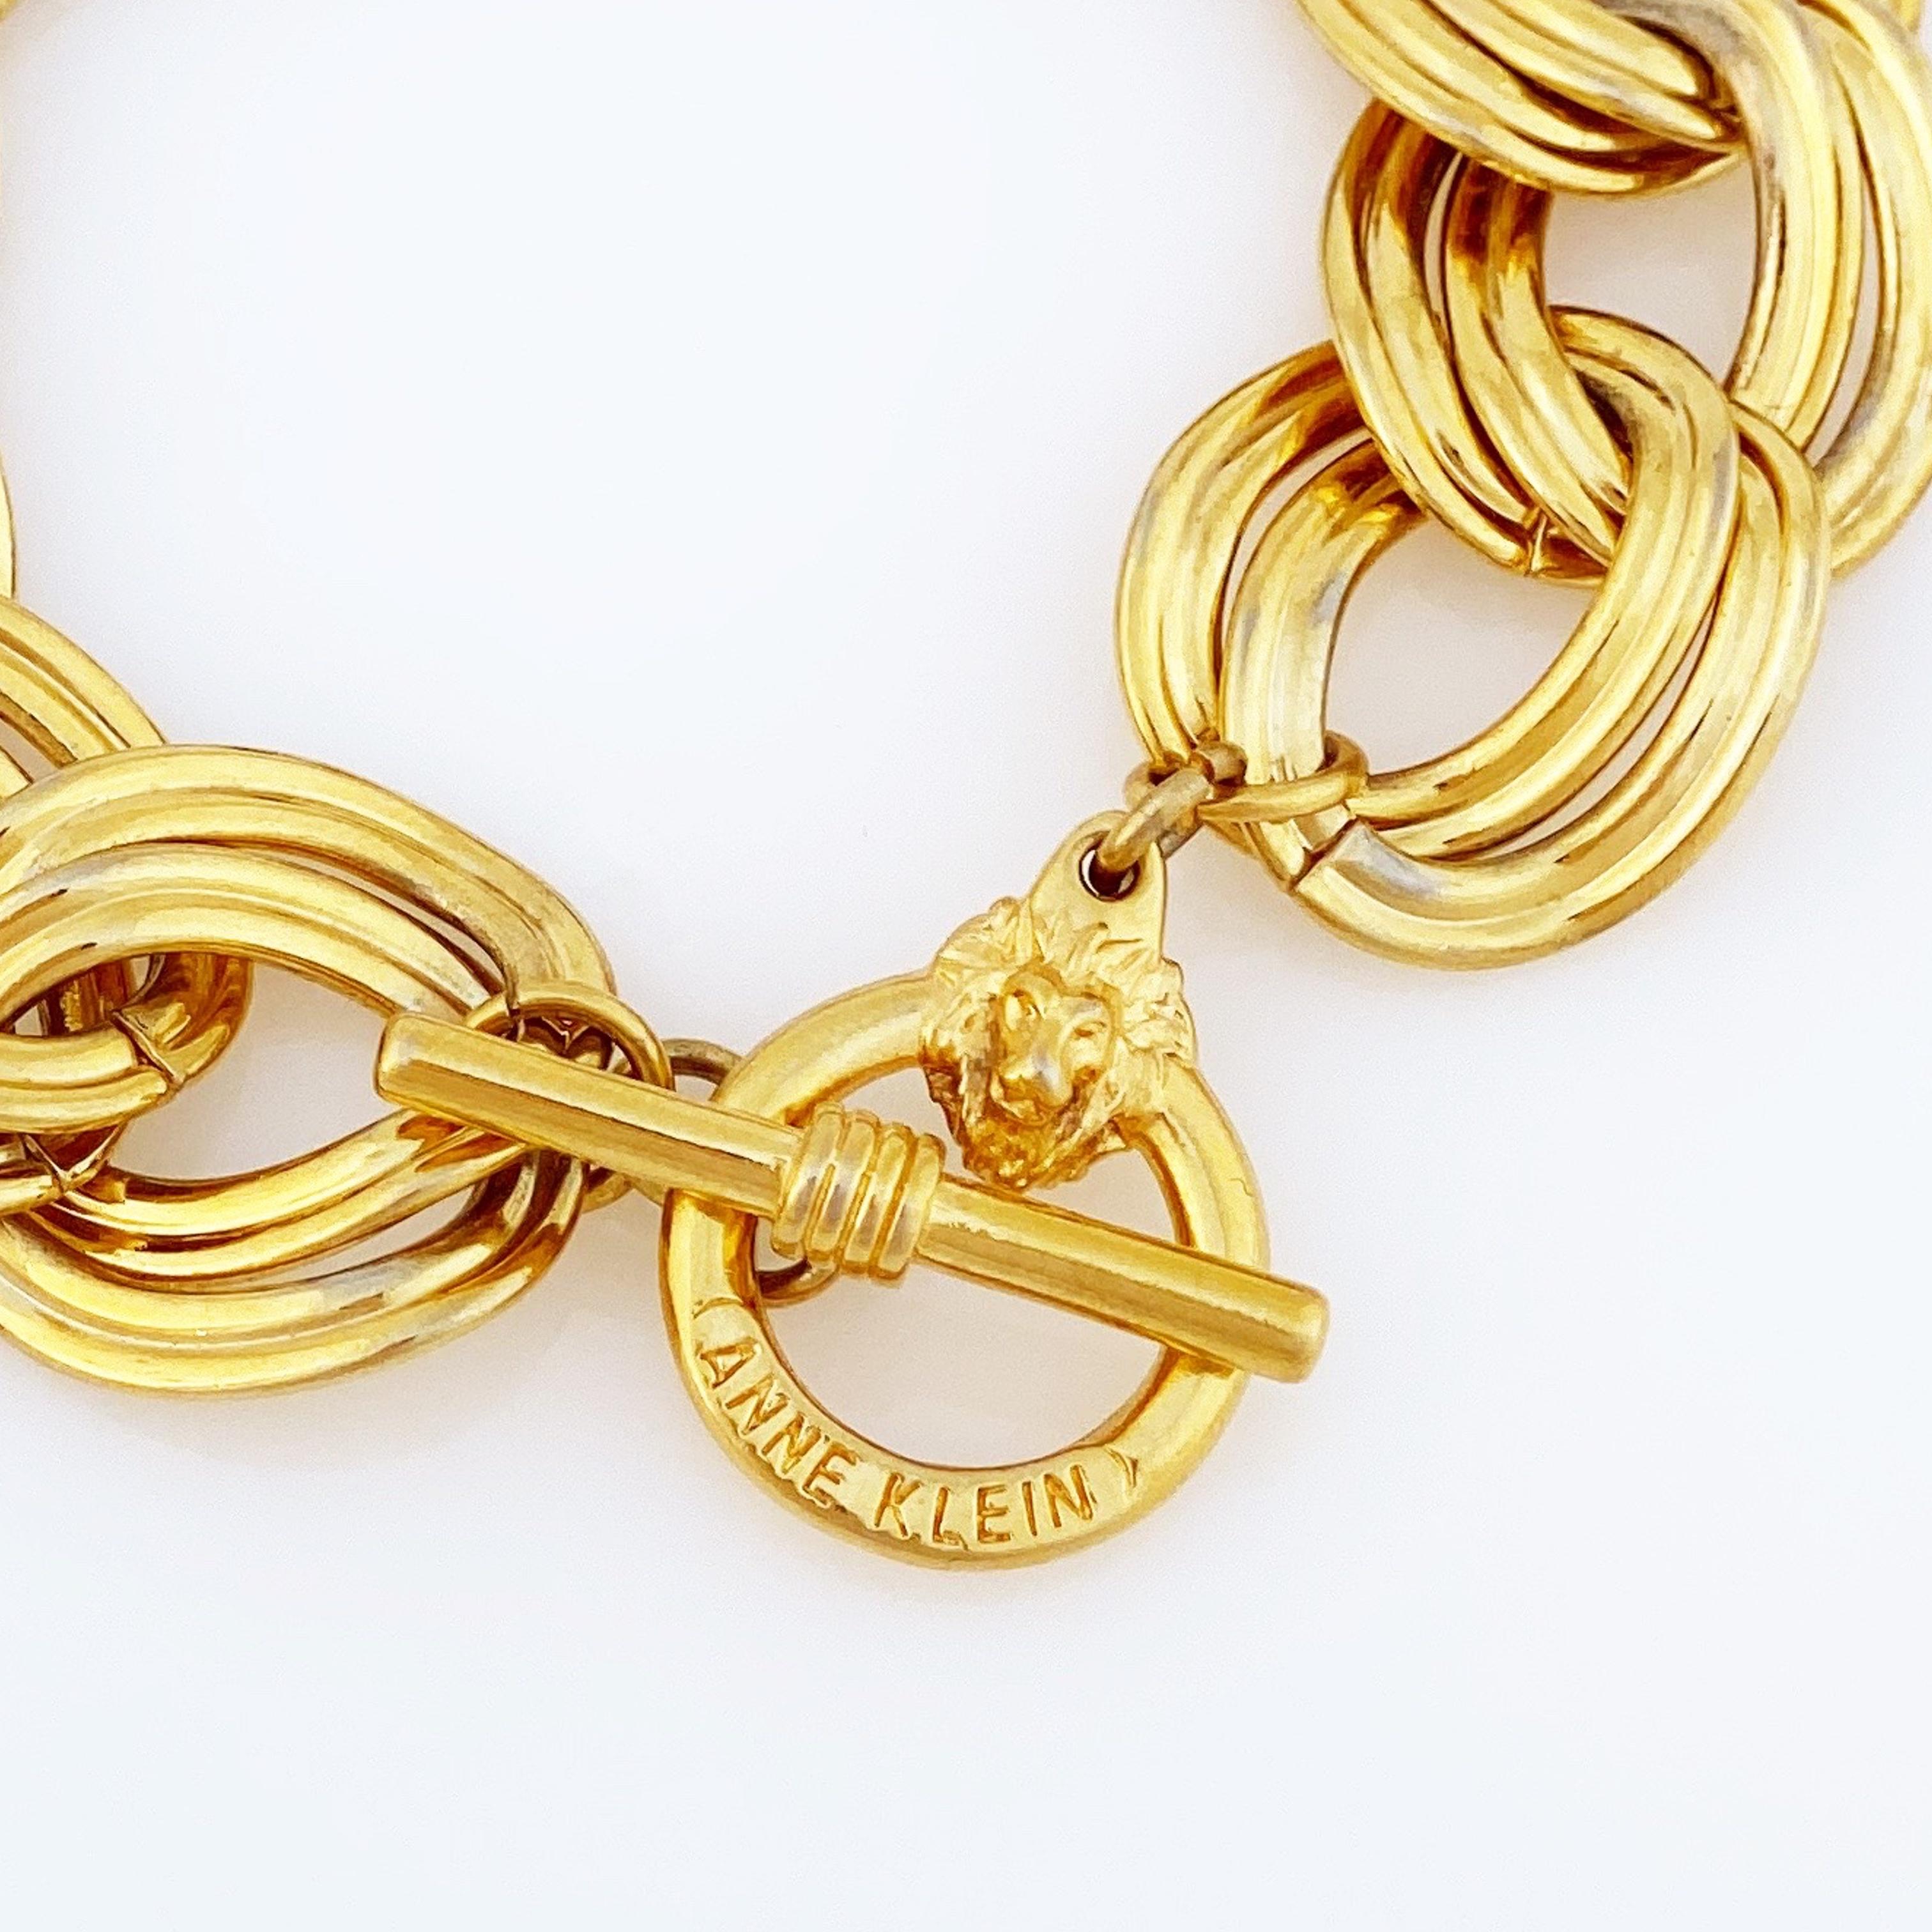 Gold Oval Link Chain Bracelet With Lion Clasp By Anne Klein, 1980s 1